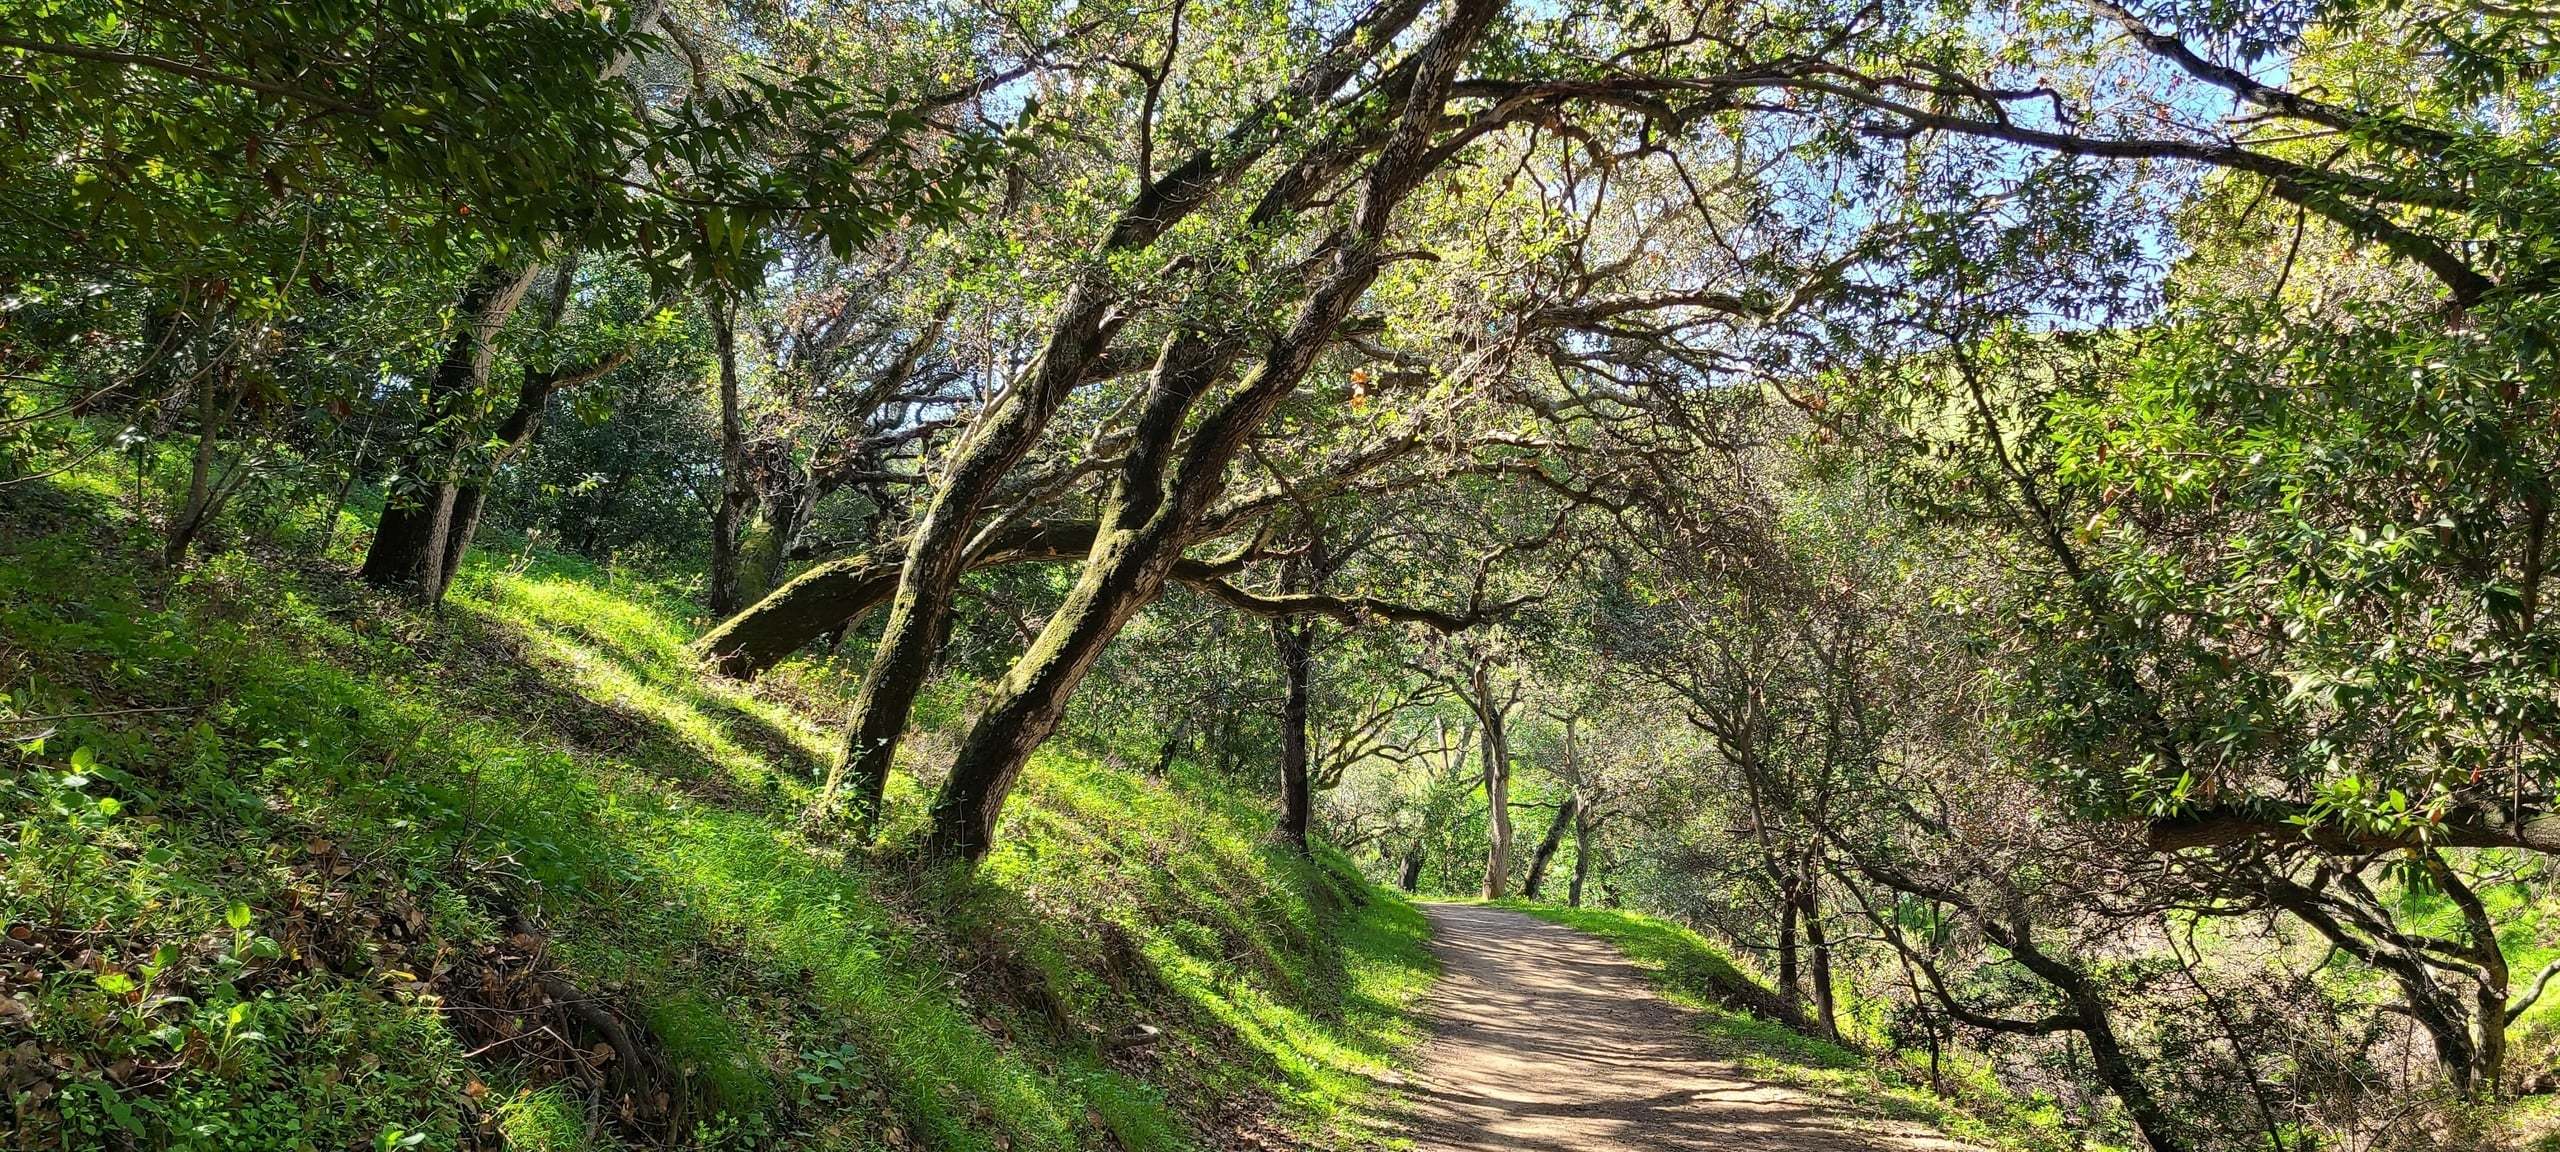 Trees curling over path near Soquel, CA